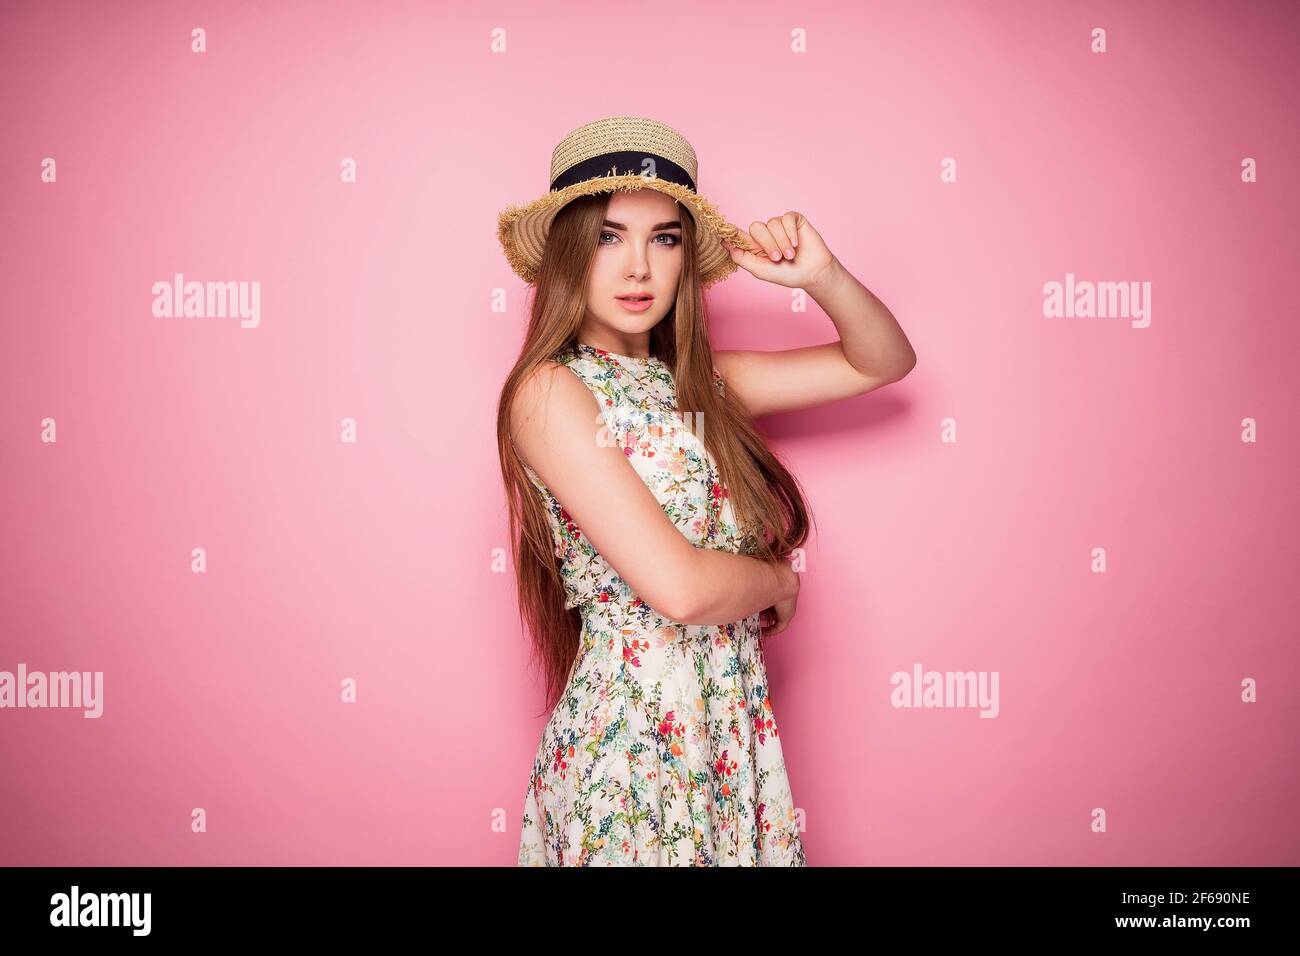 Winsome girl in romantic dress with flower print and straw hat p Stock Photo